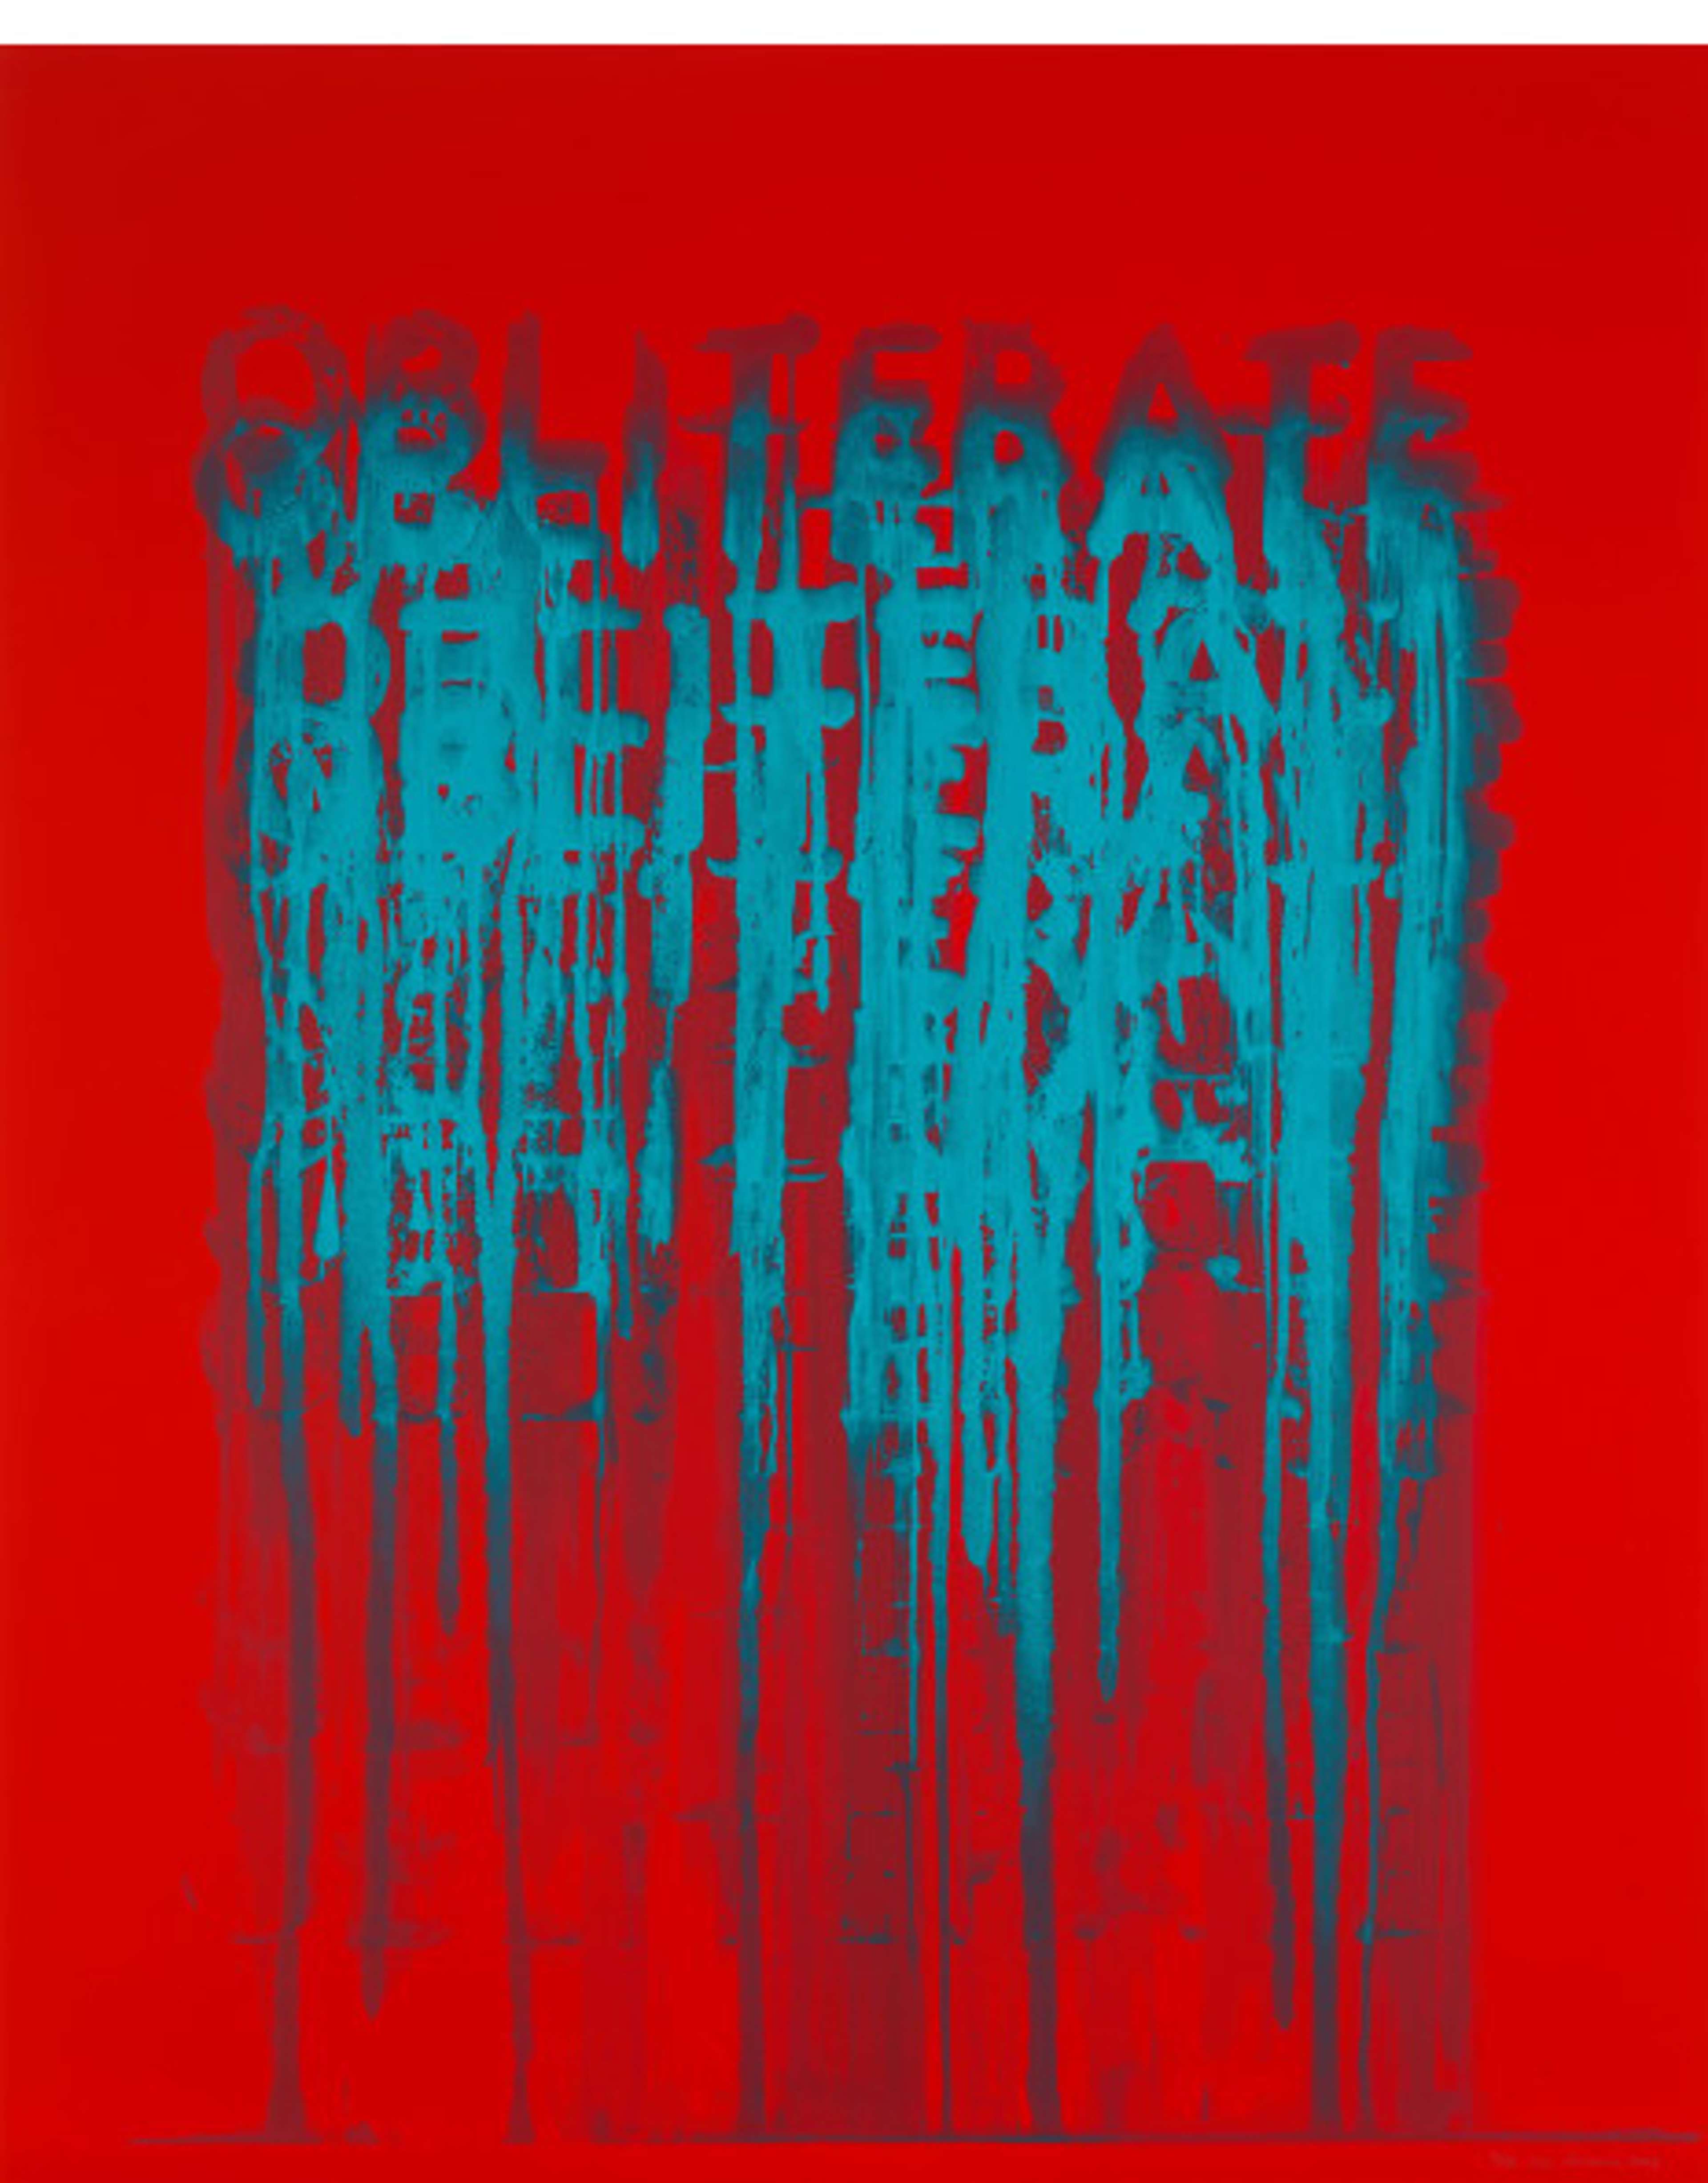 An abstract artwork featuring the word "obliterate" repeatedly stacked in turquoise blue, creating a dynamic effect as the colors blend and bleed into each other. The vibrant red background adds contrast and intensity to the composition.An abstract artwork featuring the word "obliterate" repeatedly stacked in turquoise blue, creating a dynamic effect as the colors blend and bleed into each other. The vibrant red background adds contrast and intensity to the composition.